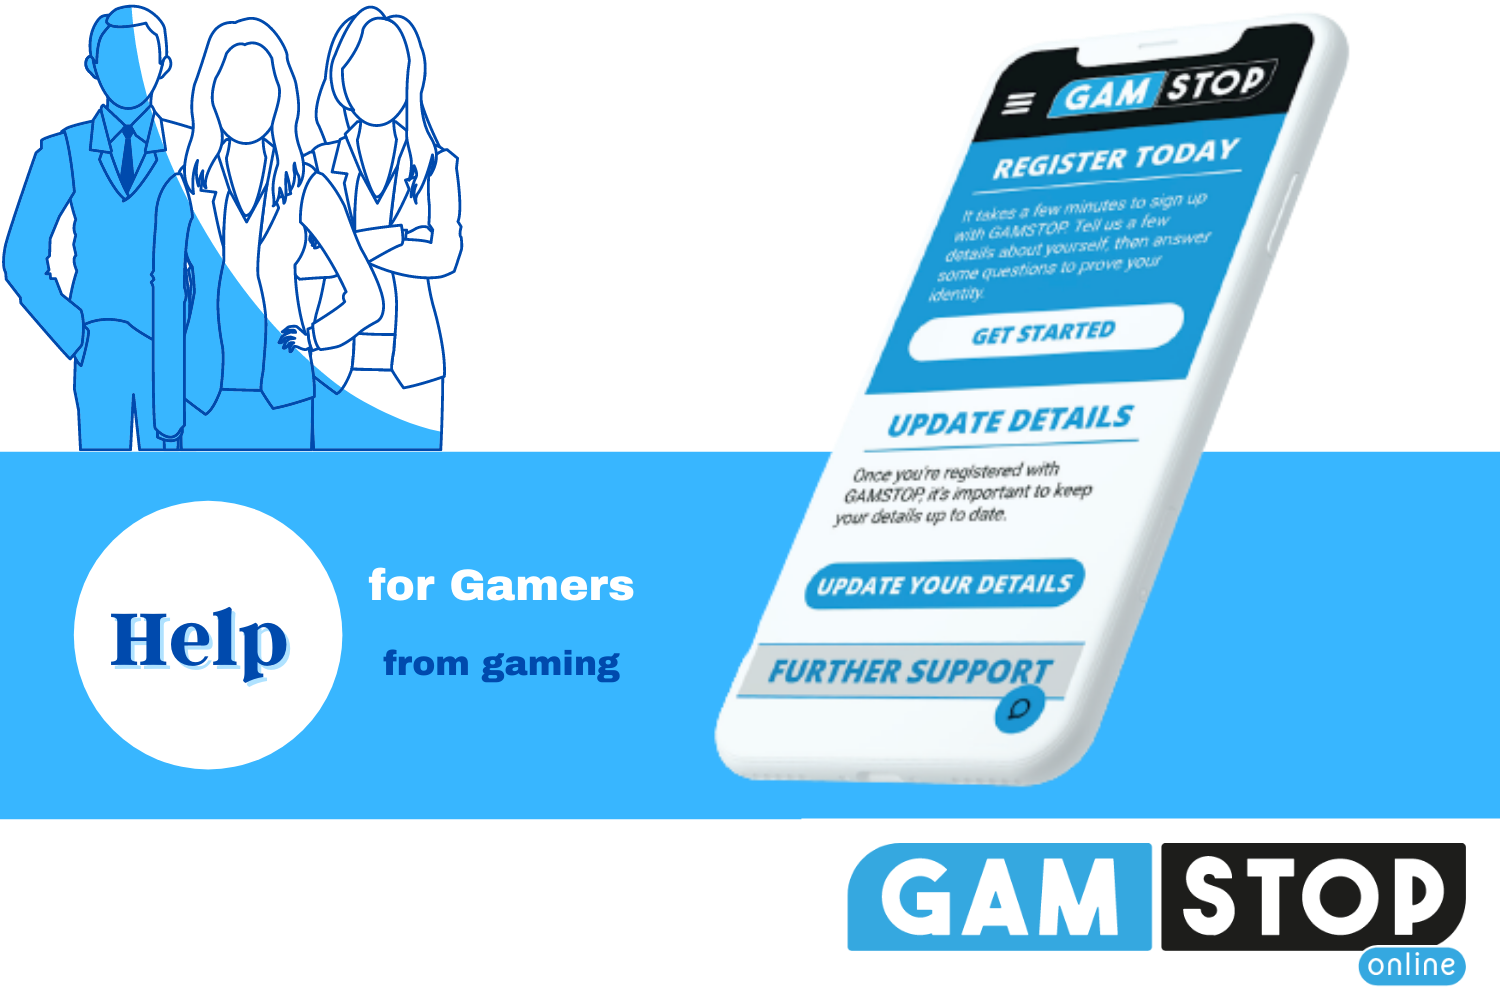 25 Questions You Need To Ask About does Gamstop include bingo halls